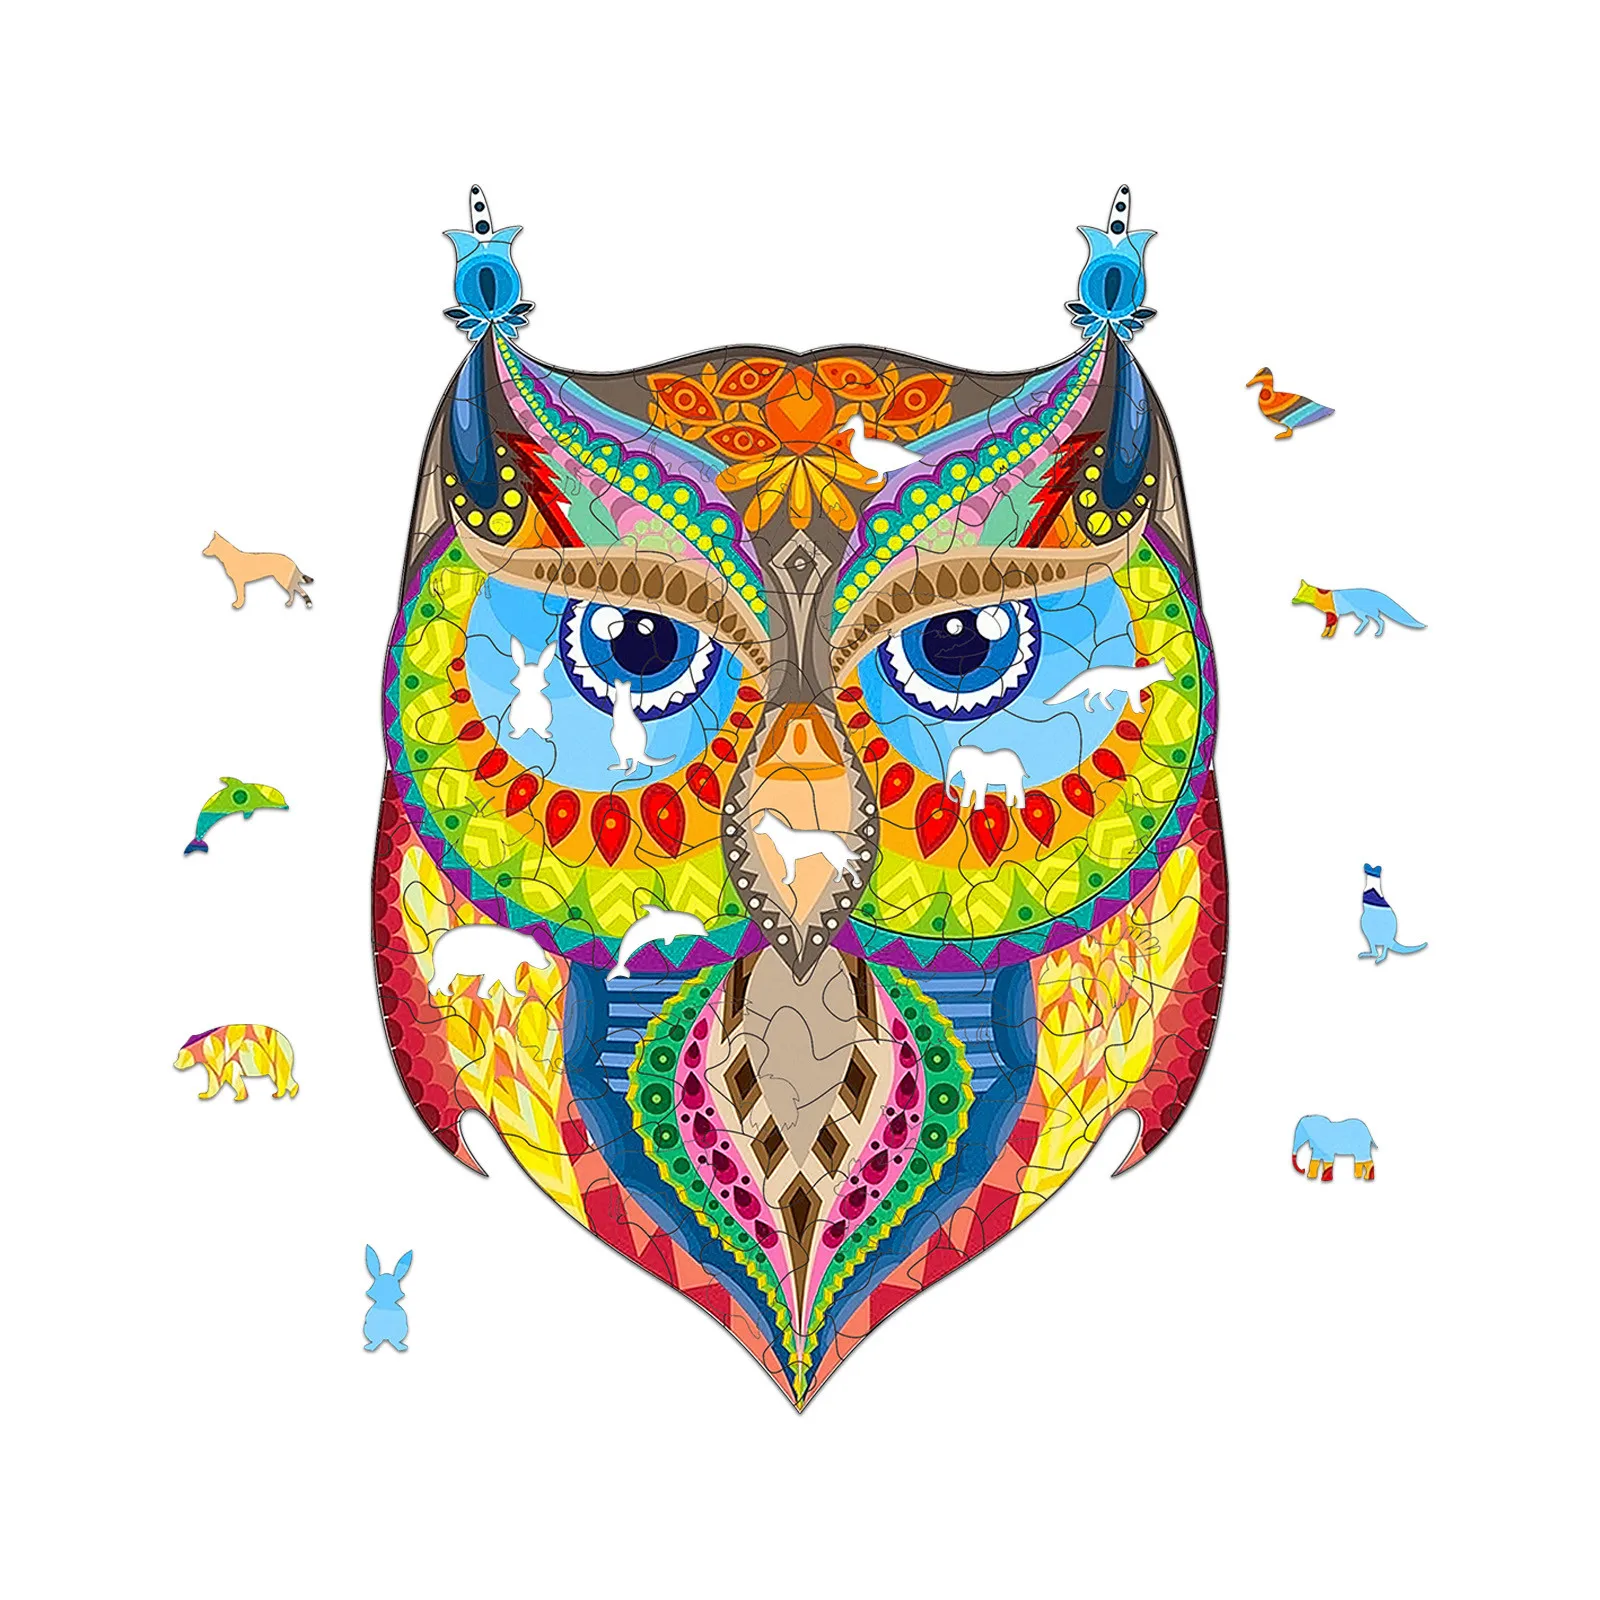 

Kawaii Owl Wooden Puzzle Unique Shape Pieces 3D Animal Puzzle Gift For Adults And Kids Magination Develop Intellectual Juguetes